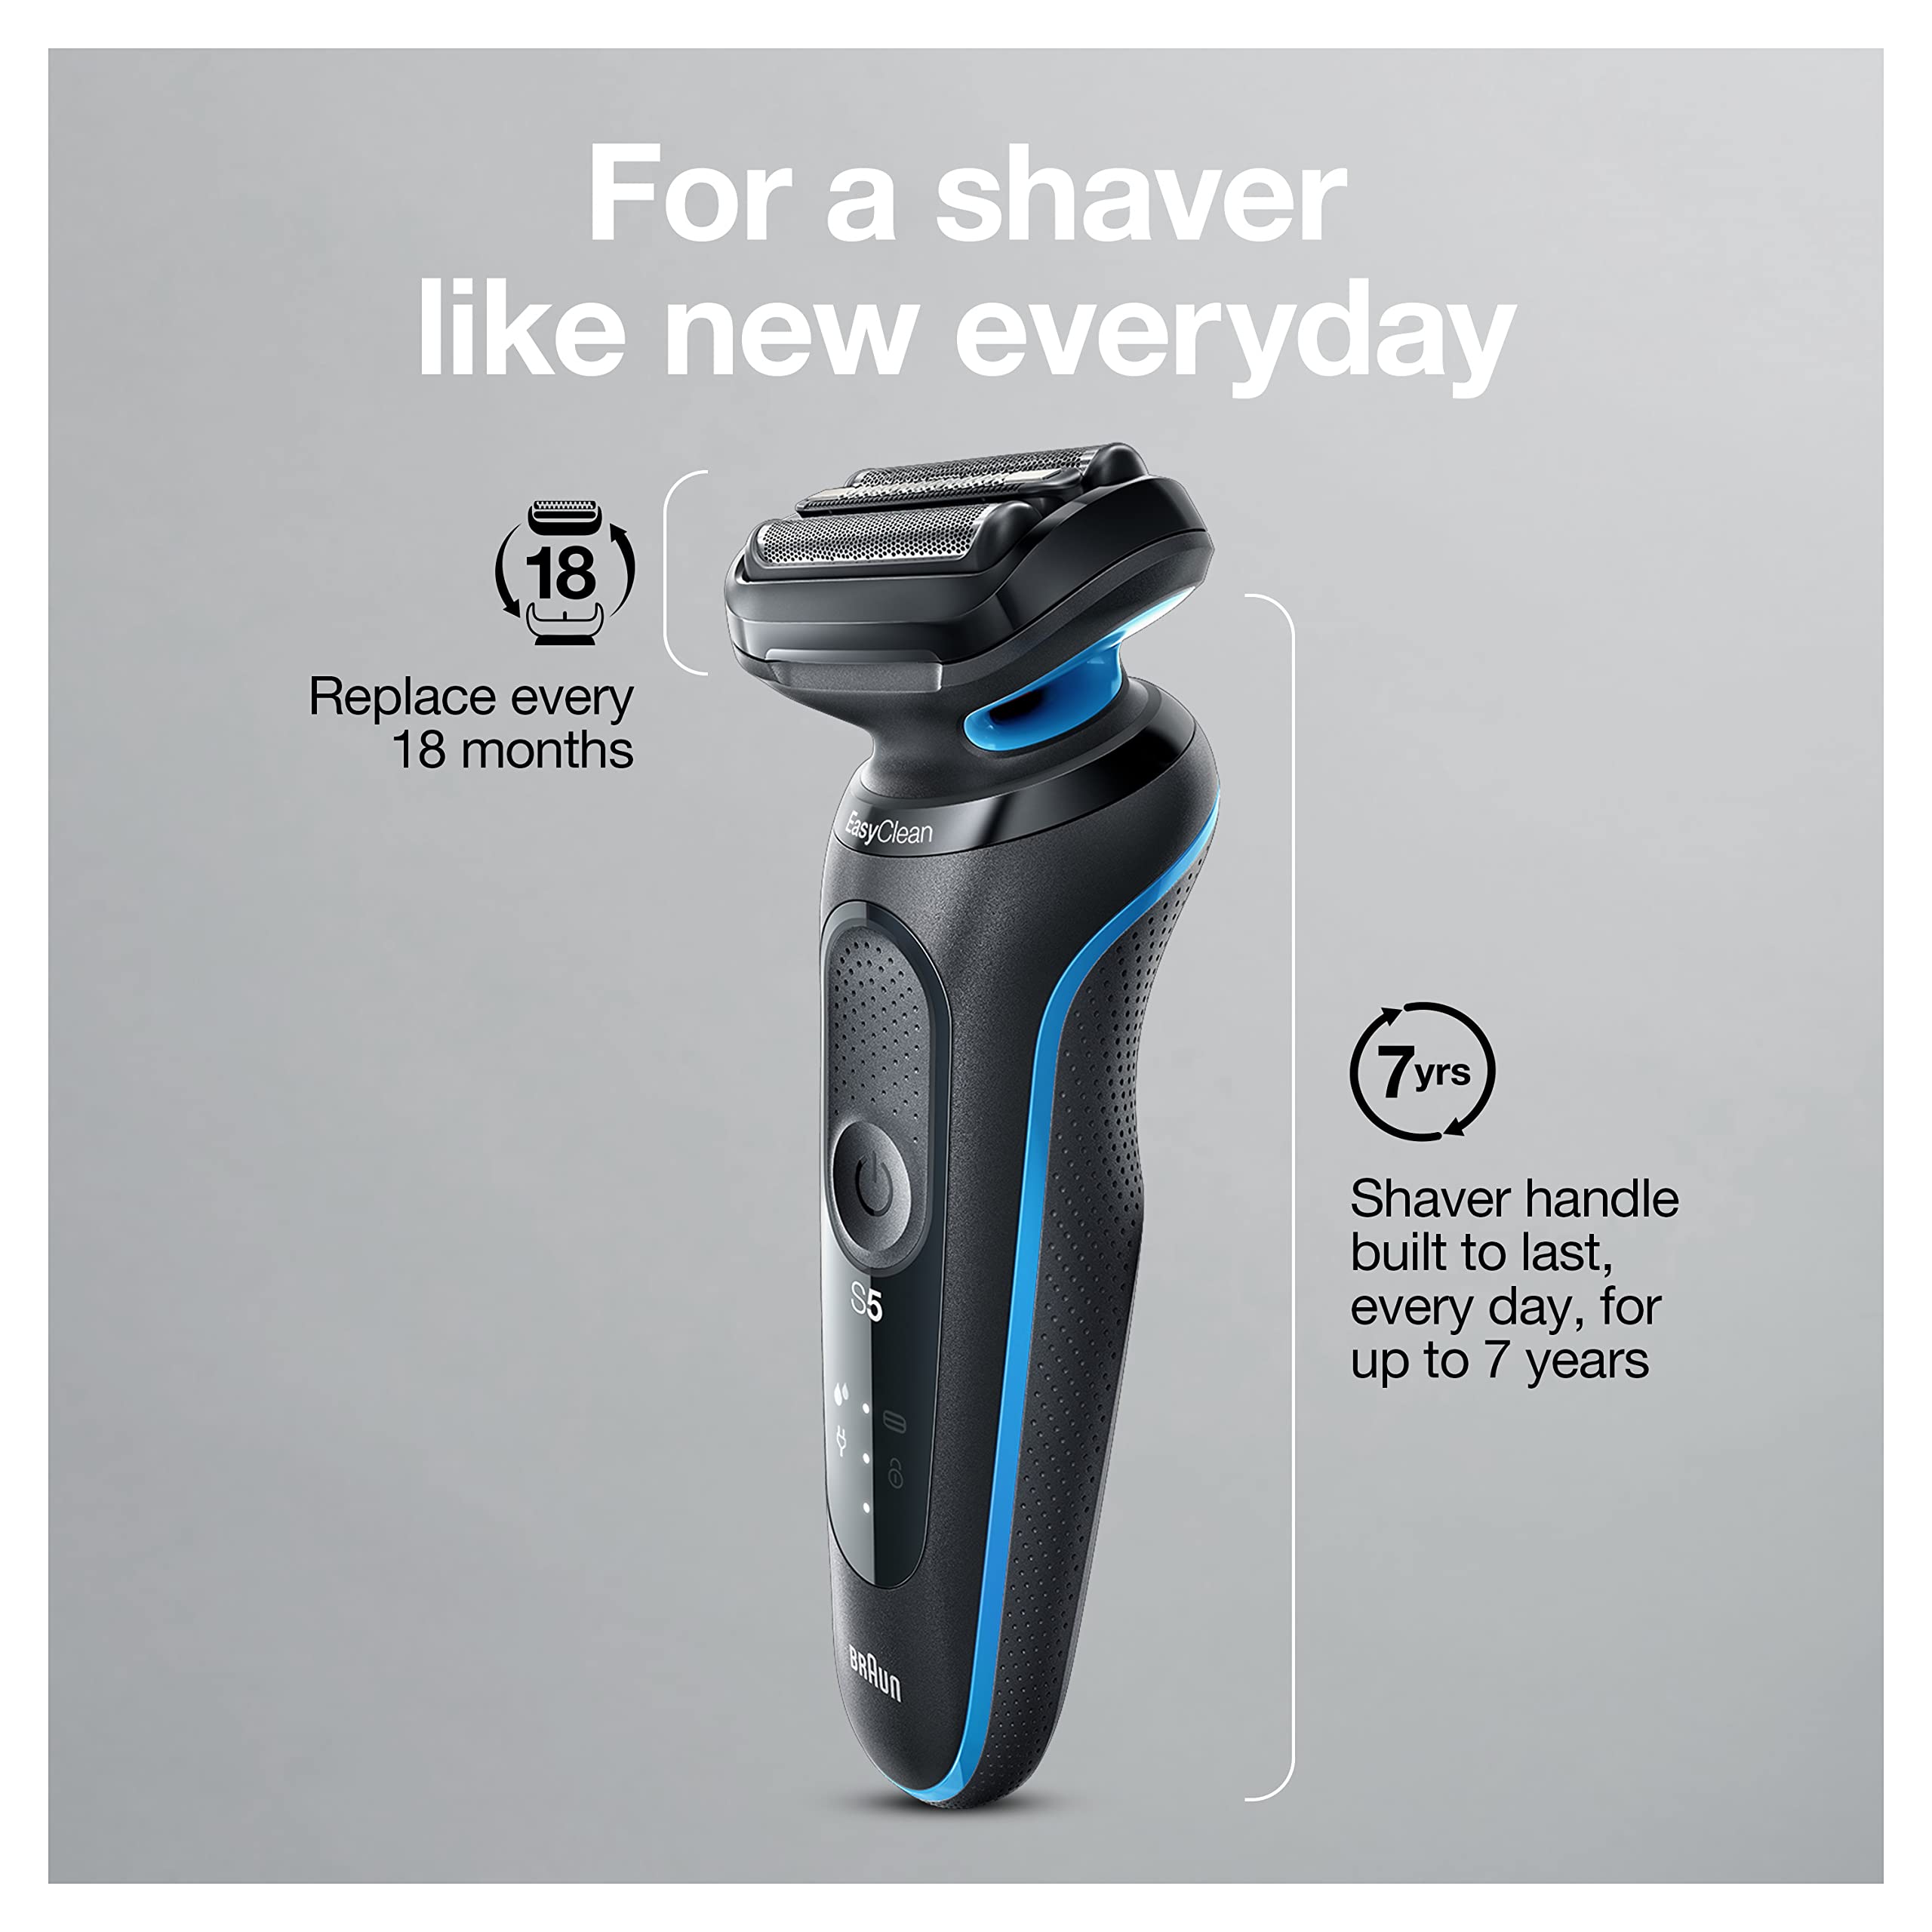 Braun Series 5 5049cs Electric Shaver with Charging Stand, Beard Trimmer, Face Shaver, Wet & Dry, Rechargeable, Cordless Foil Shaver, Blue